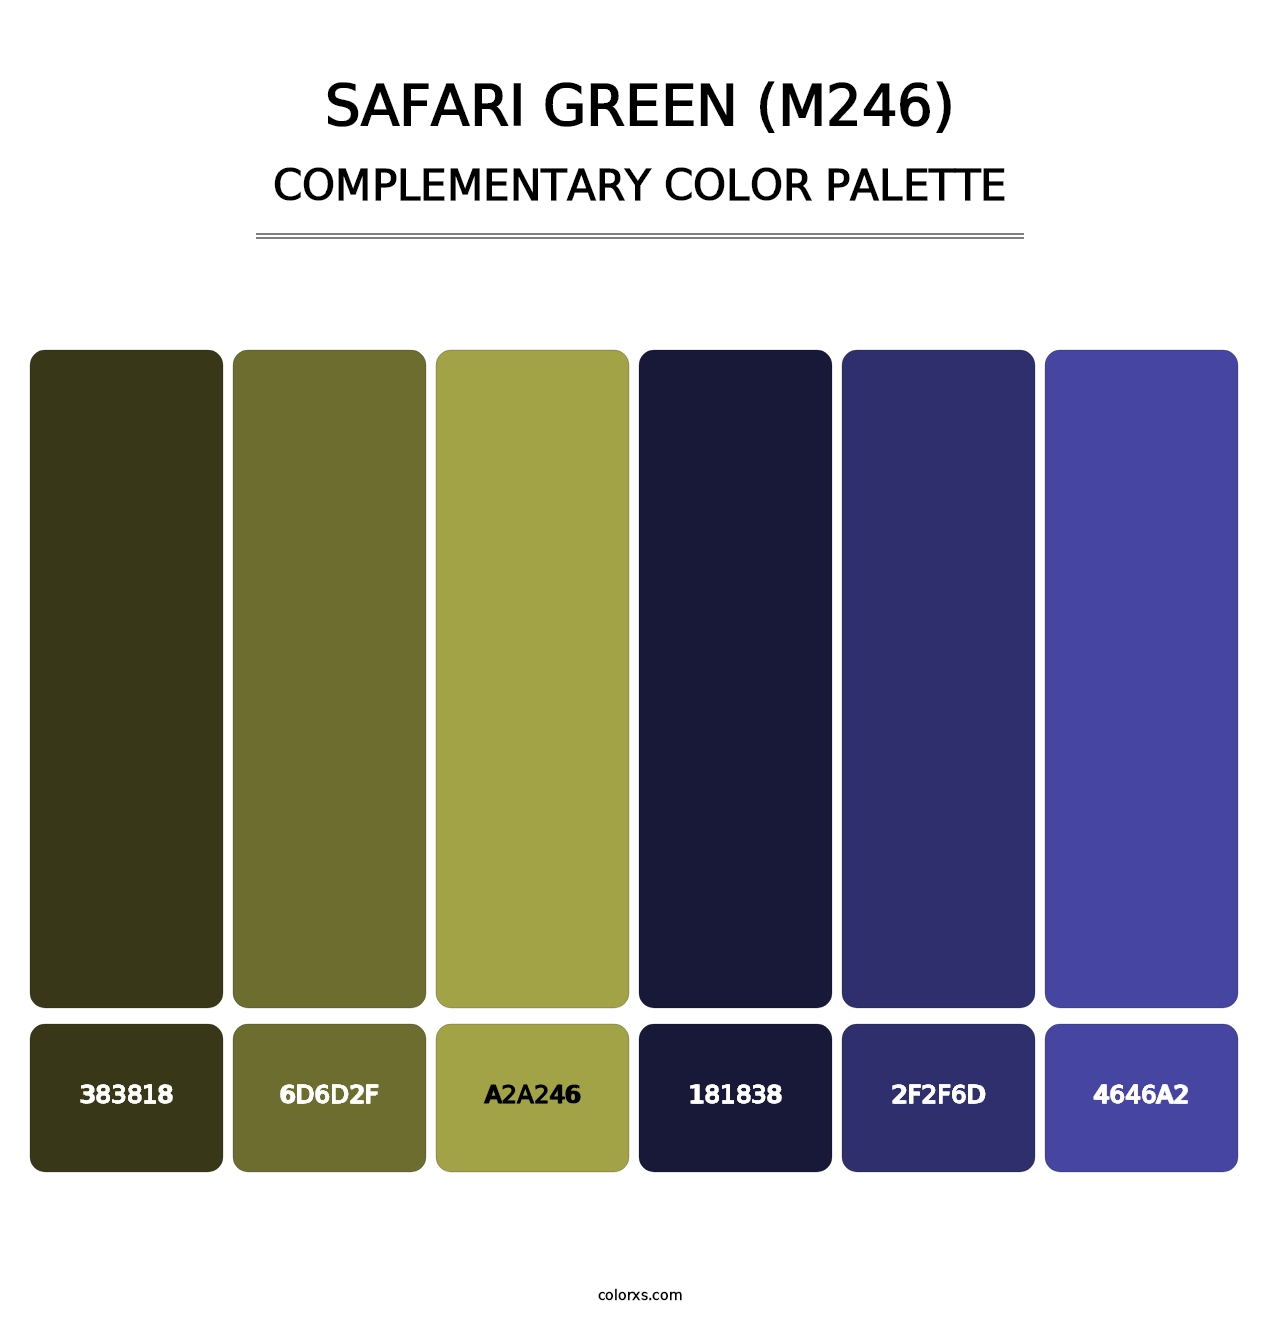 Safari Green (M246) - Complementary Color Palette